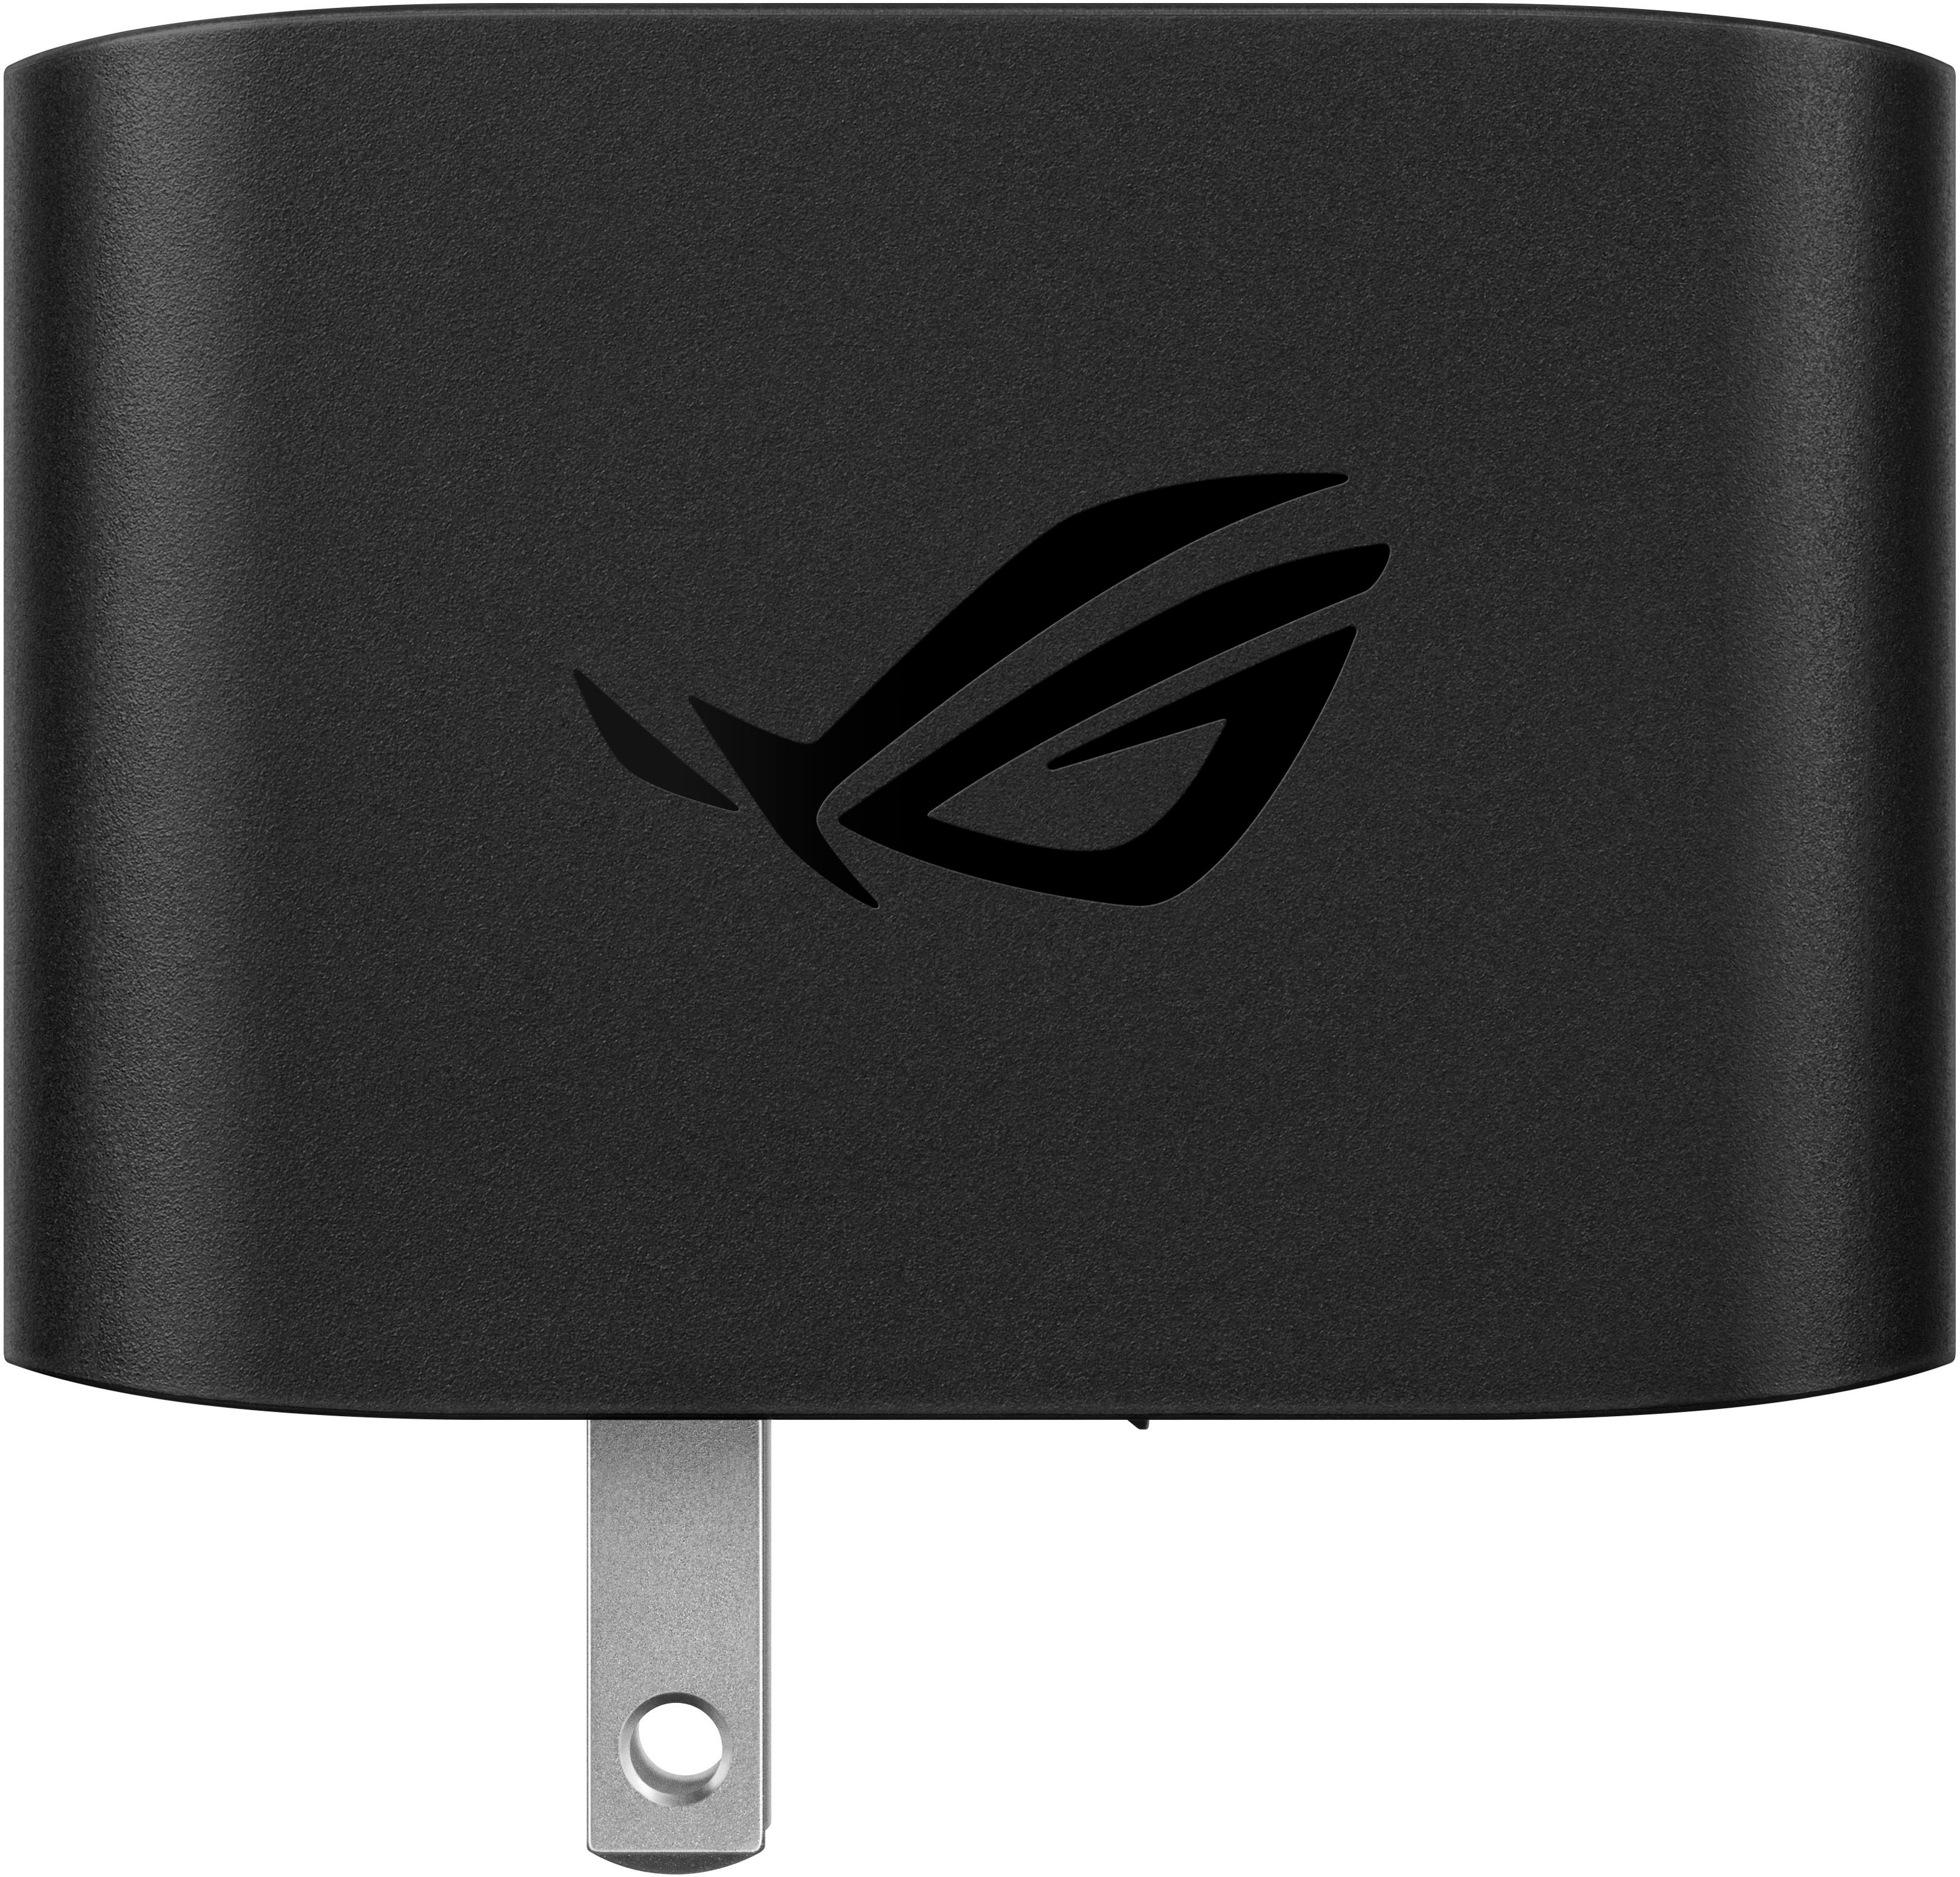 Best ASUS ROG Ally Docks for TV and External Monitors - Nerd Techy